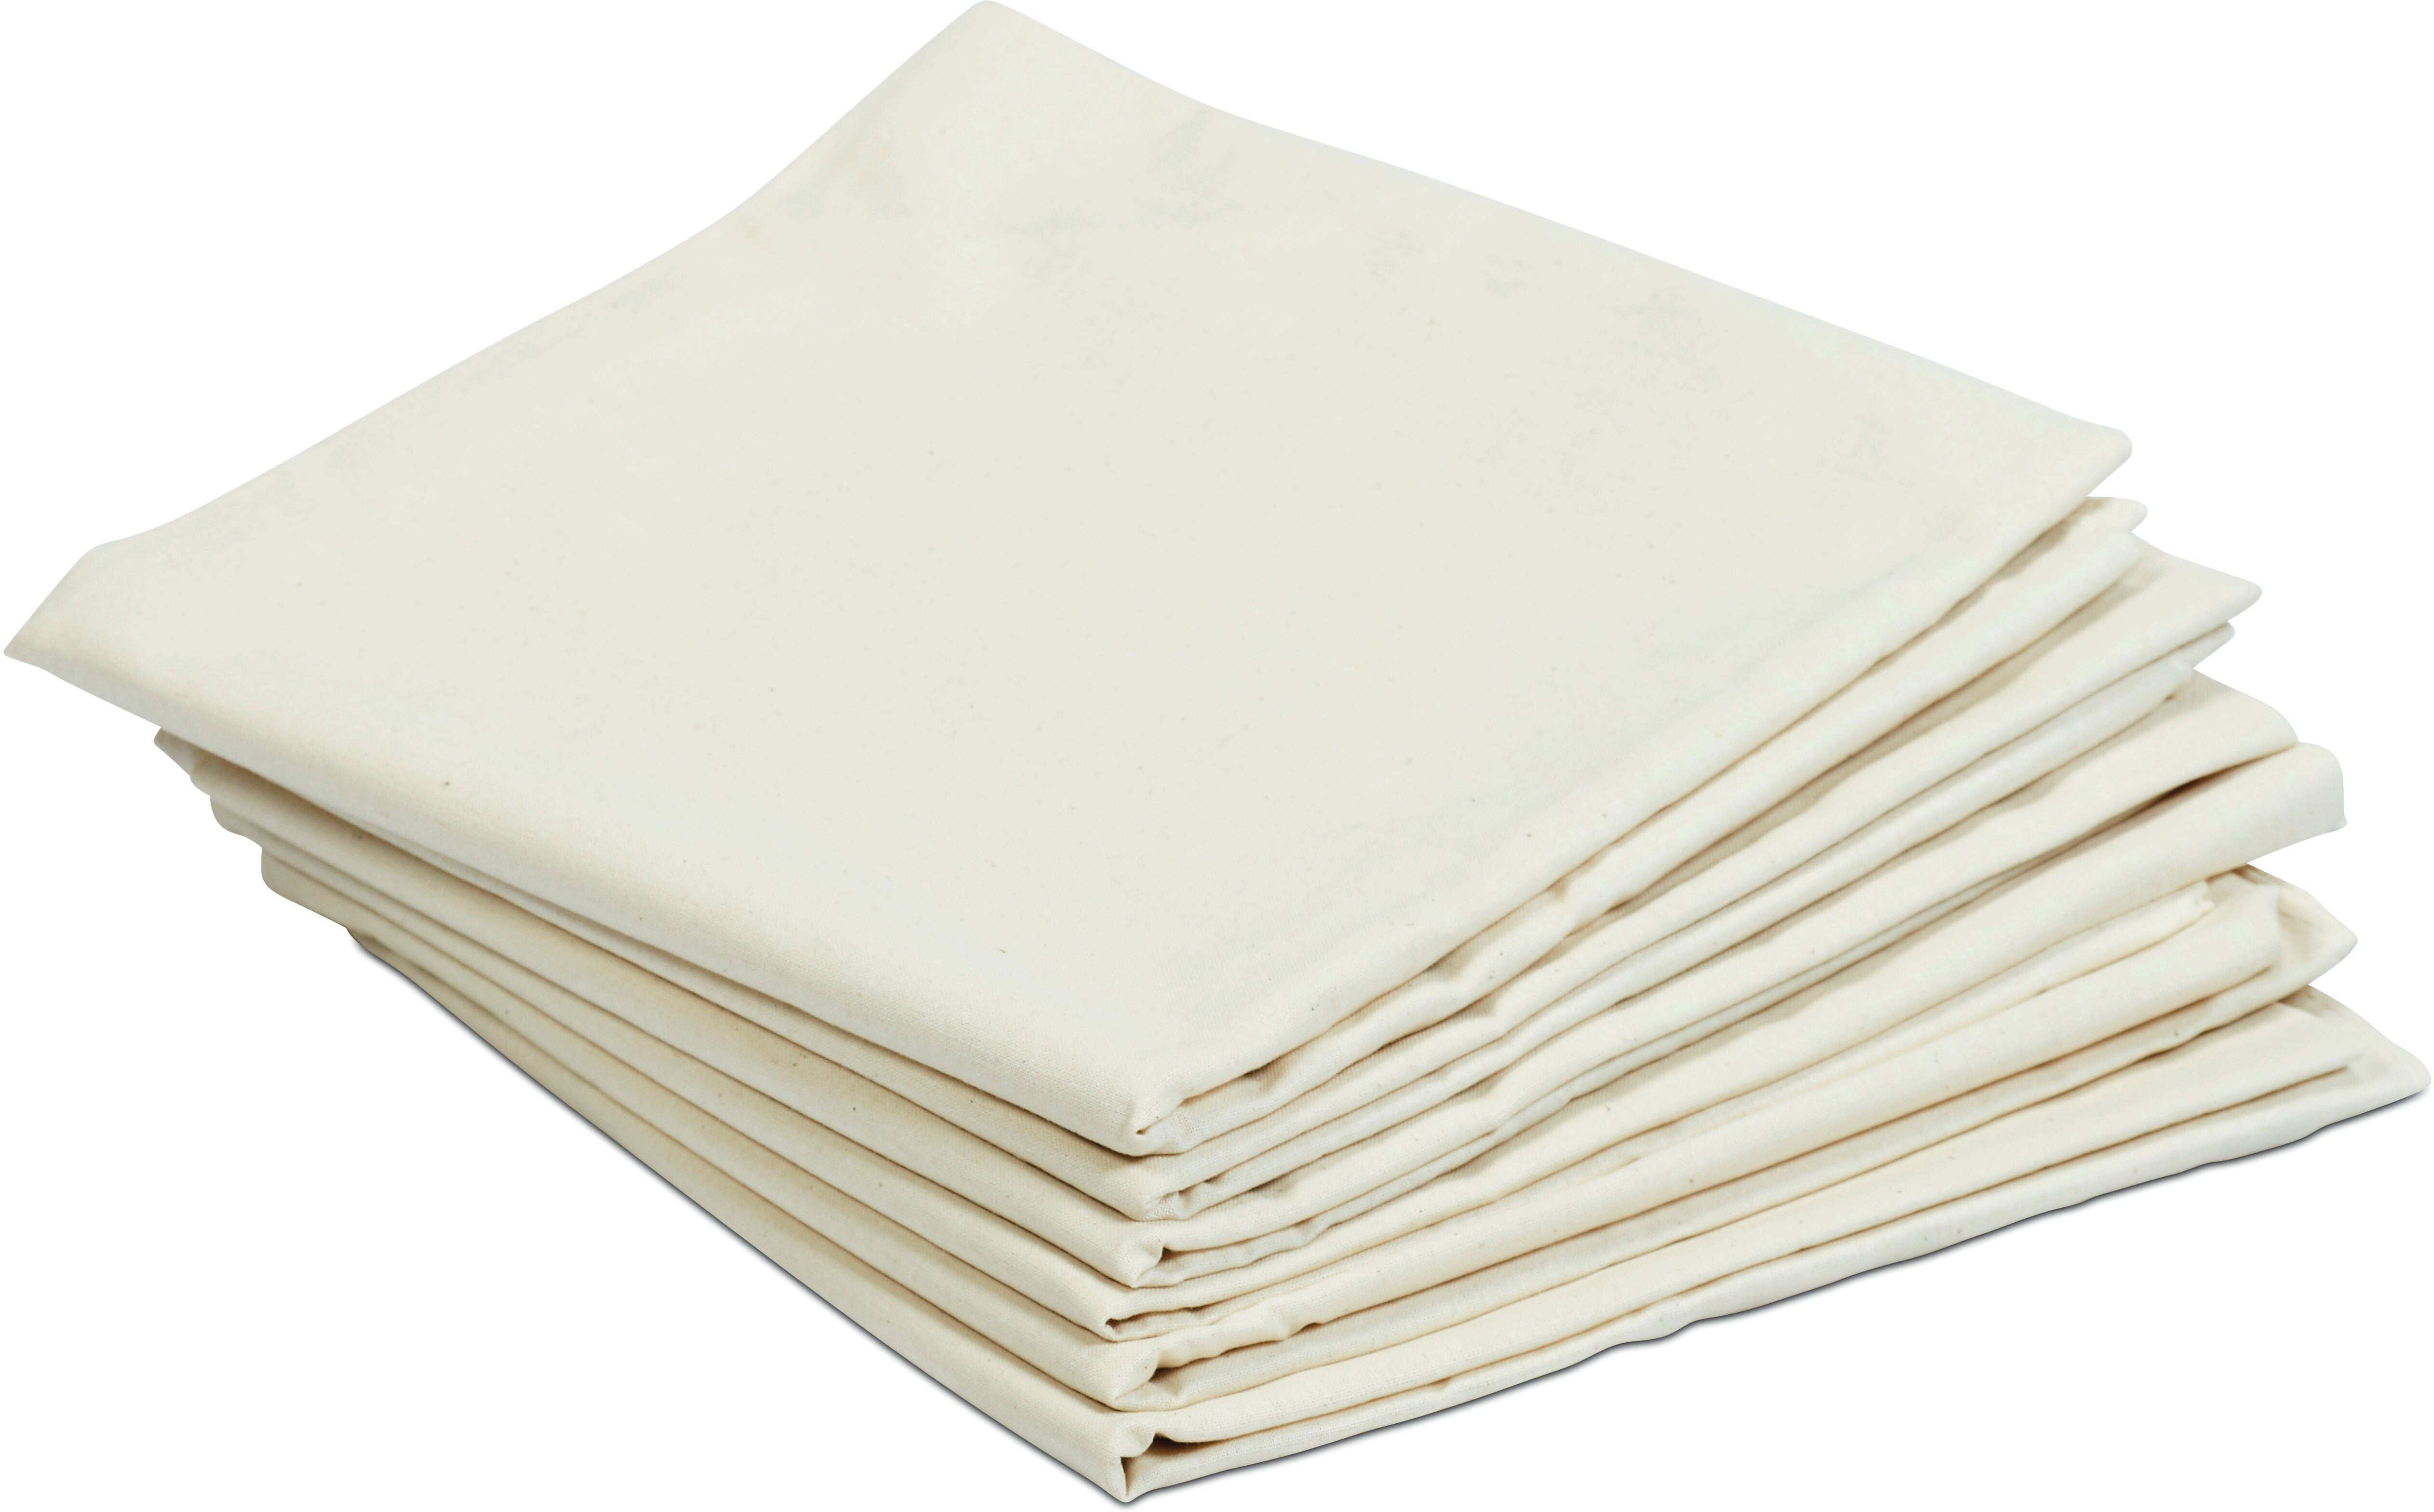 Millhouse Sleep Pod Sheets - Pack of 6 - Just For Schools